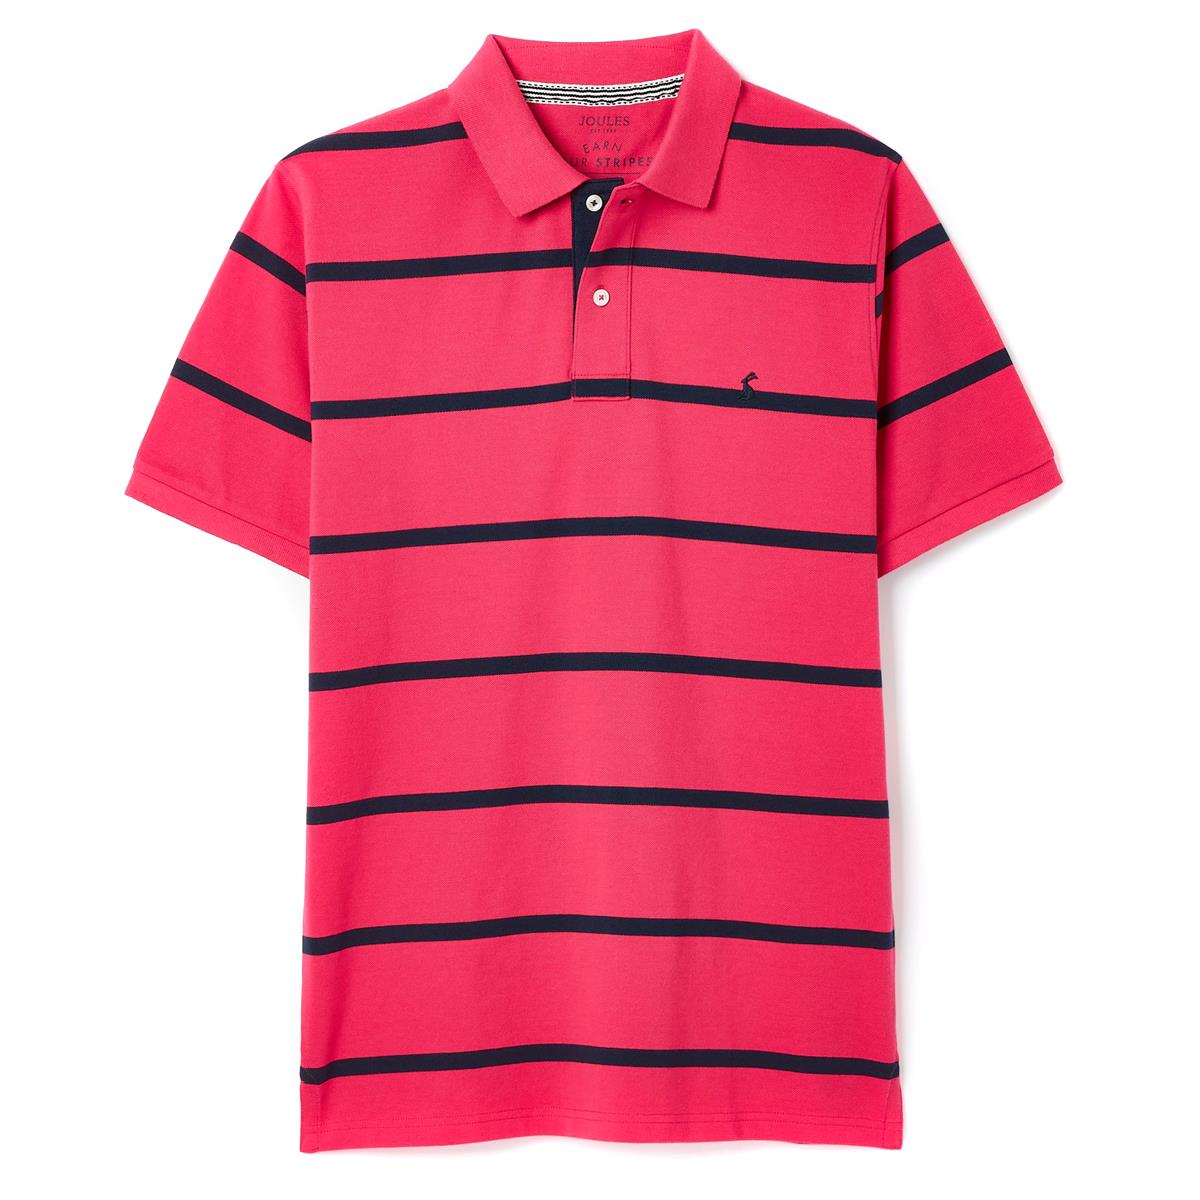 Joules Filbert Mens Polo Shirt Questions & Answers